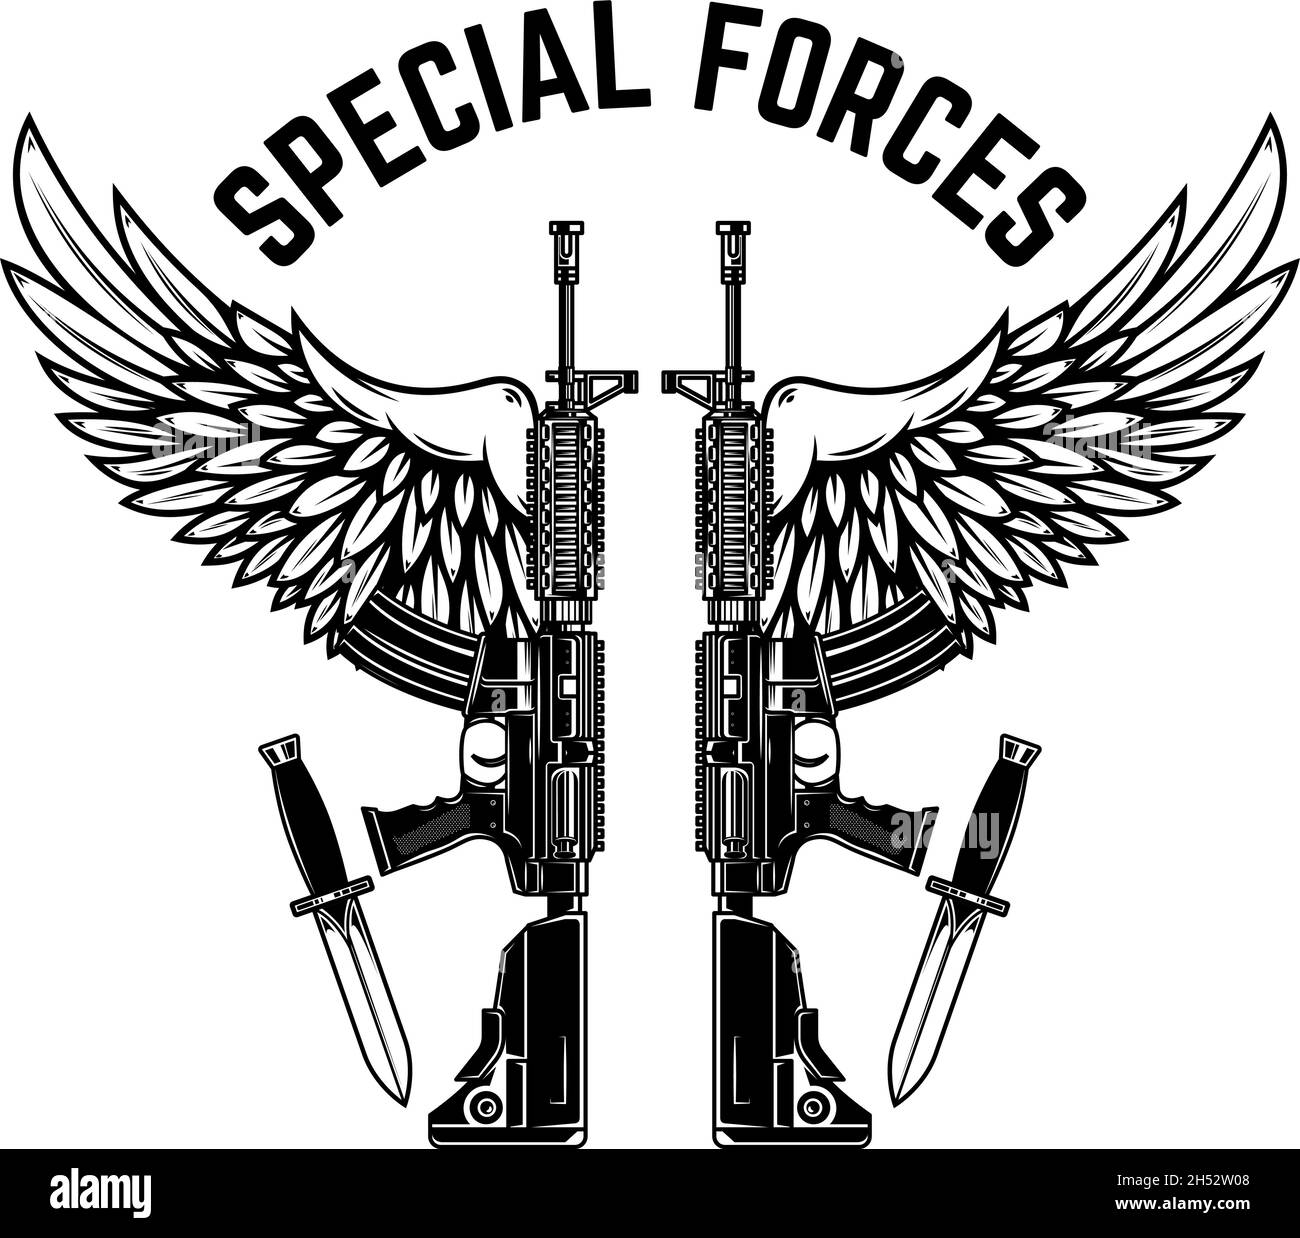 Special forces. ar-15 assault rifles with wings. Design element for logo, label, sign, emblem. Vector illustration Stock Vector